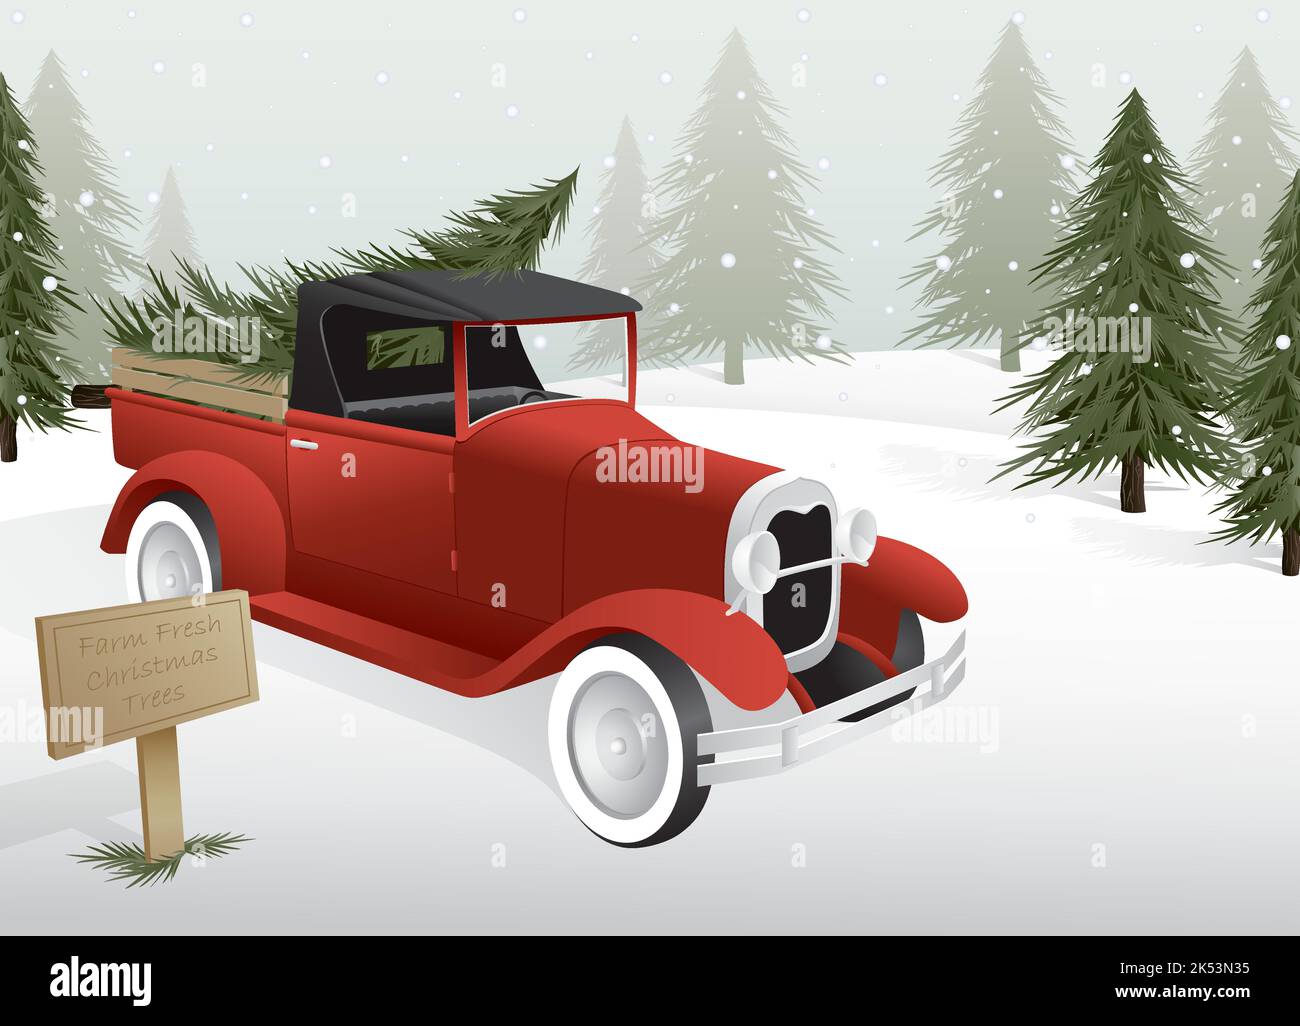 A vintage style pickup truck with a tree in the back on a Christmas tree lot Stock Vector